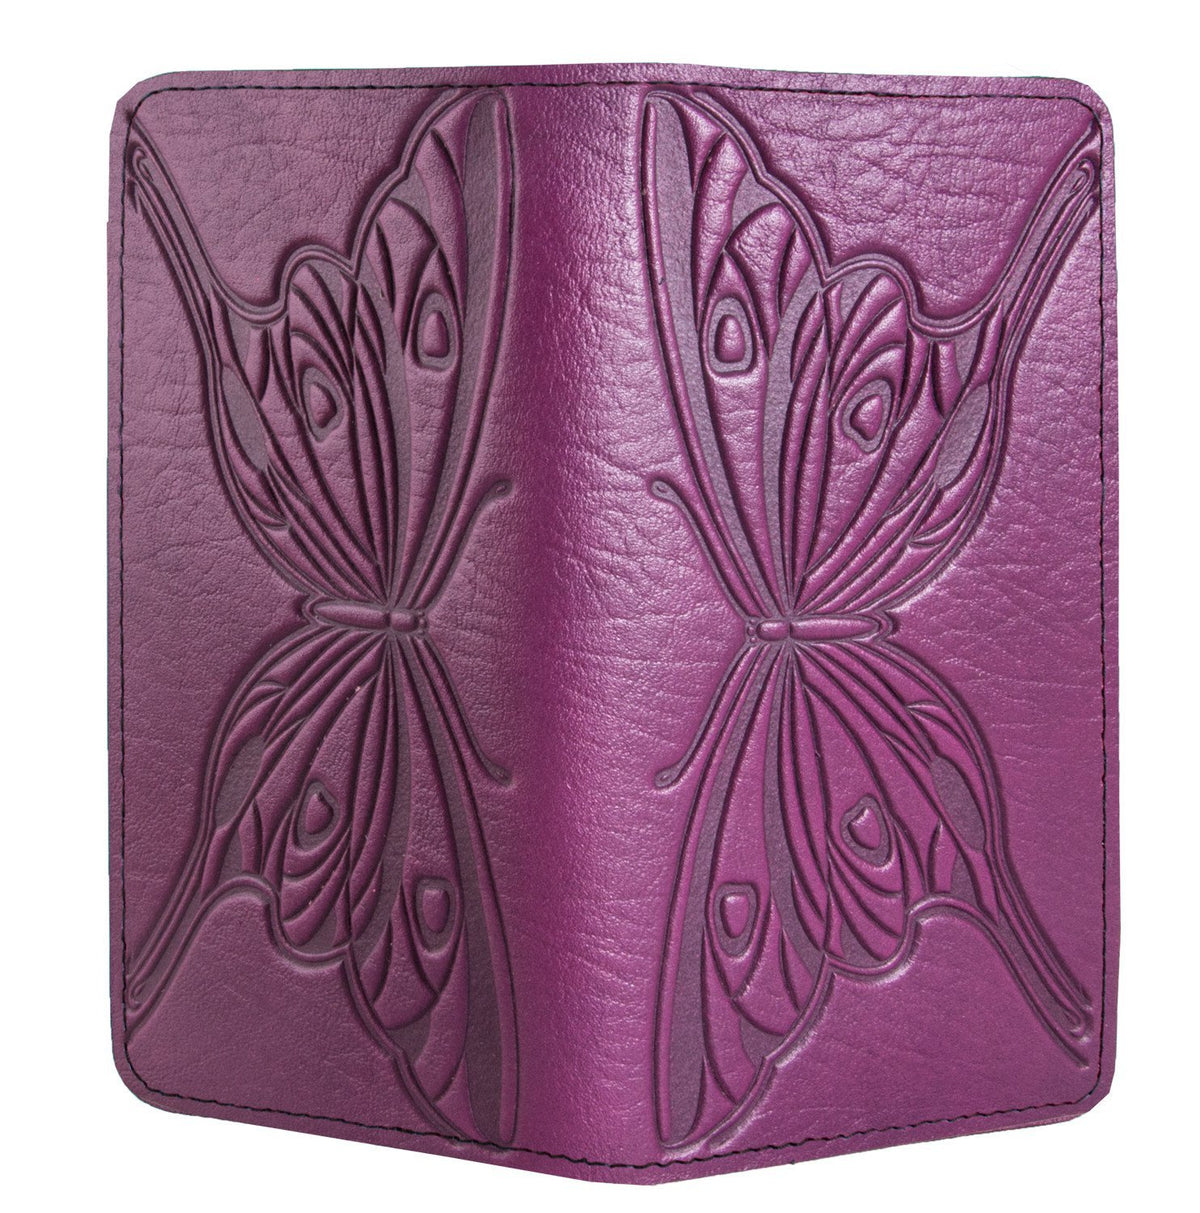 Oberon Design Small Oberon Design Small Leather Smartphone Wallet Case, Butterfly in Orchid